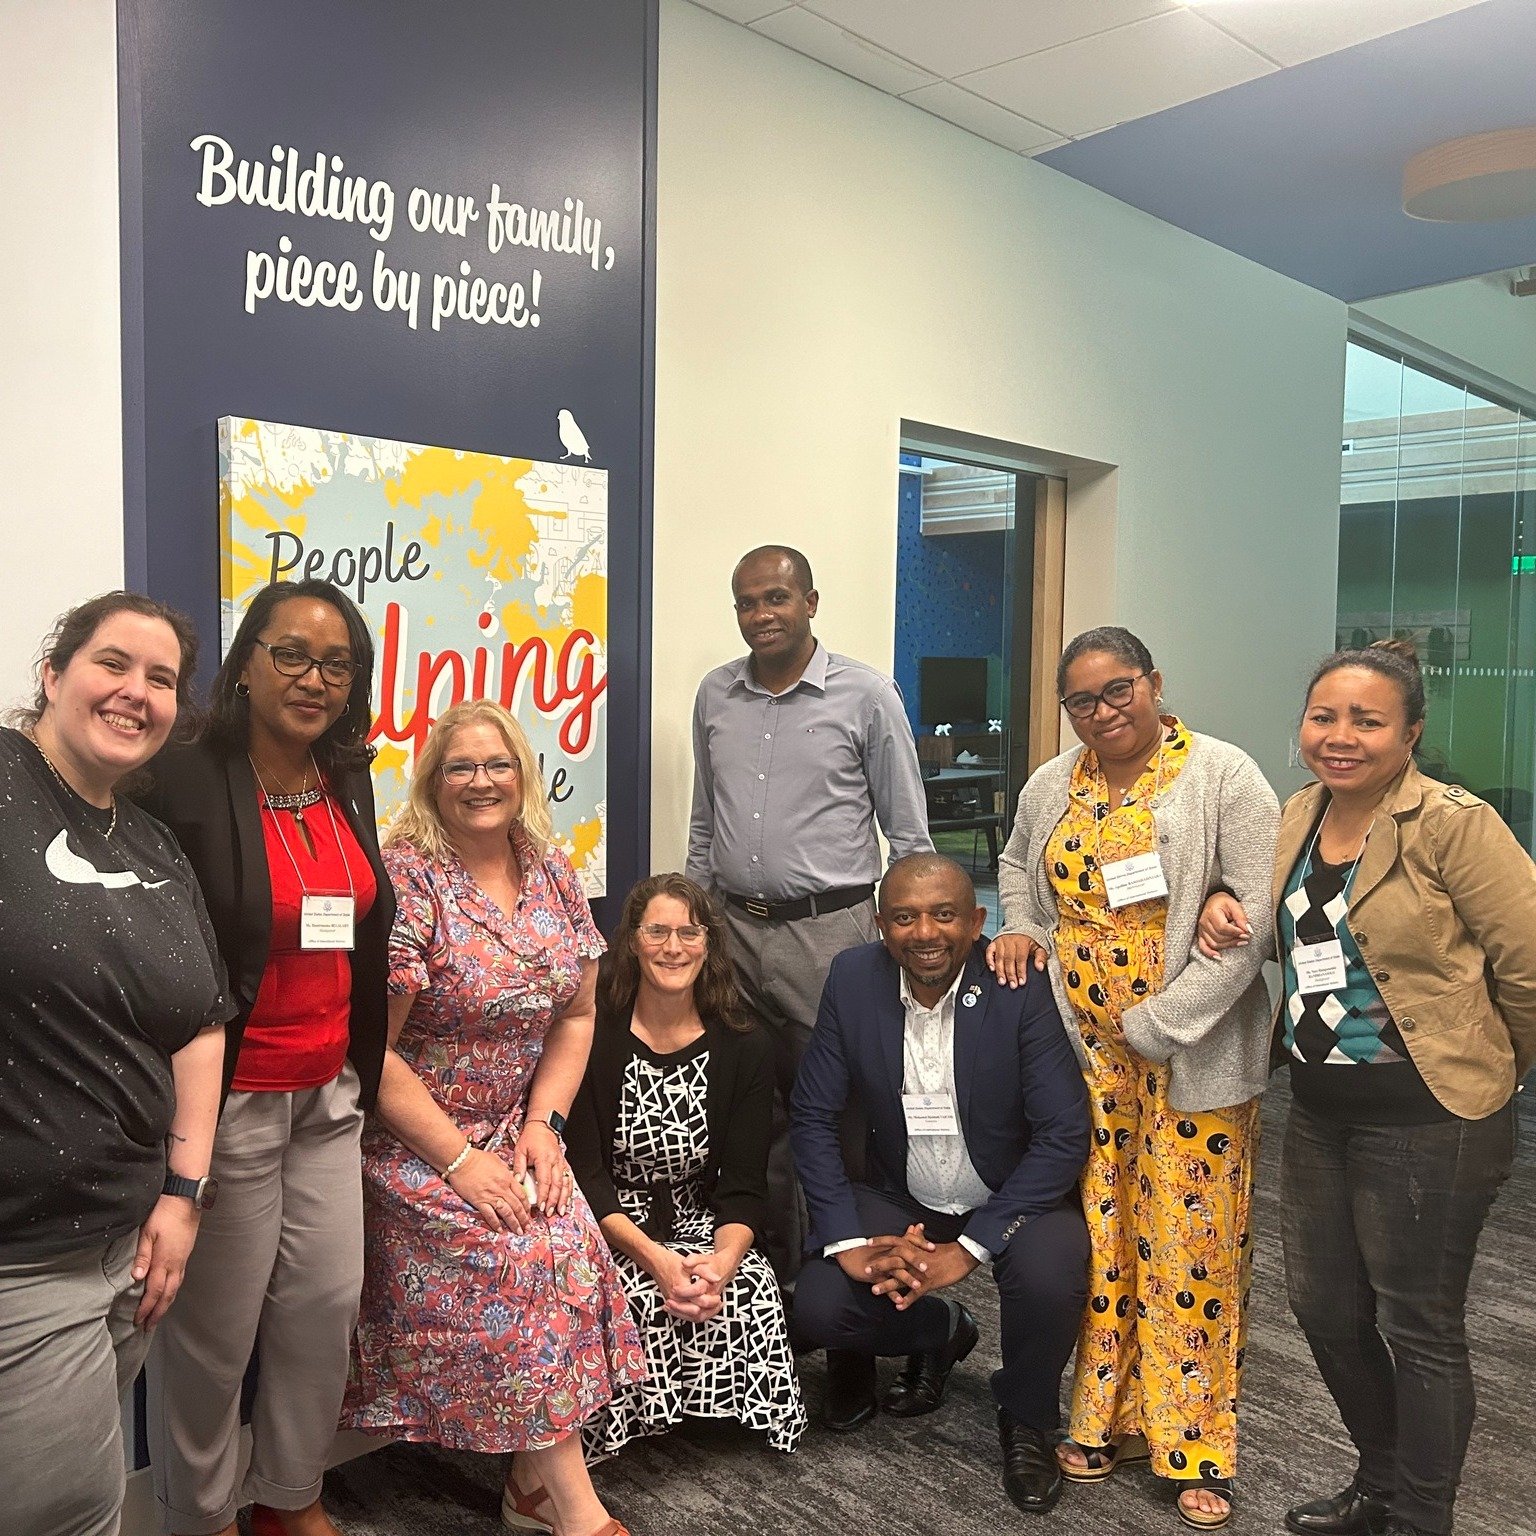 International leaders who visit our region through programs like International Visitor Leadership Program (IVLP) meet with their peers to explore challenges that are pervasive in our area and around the world. One of the most ubiquitous and difficult